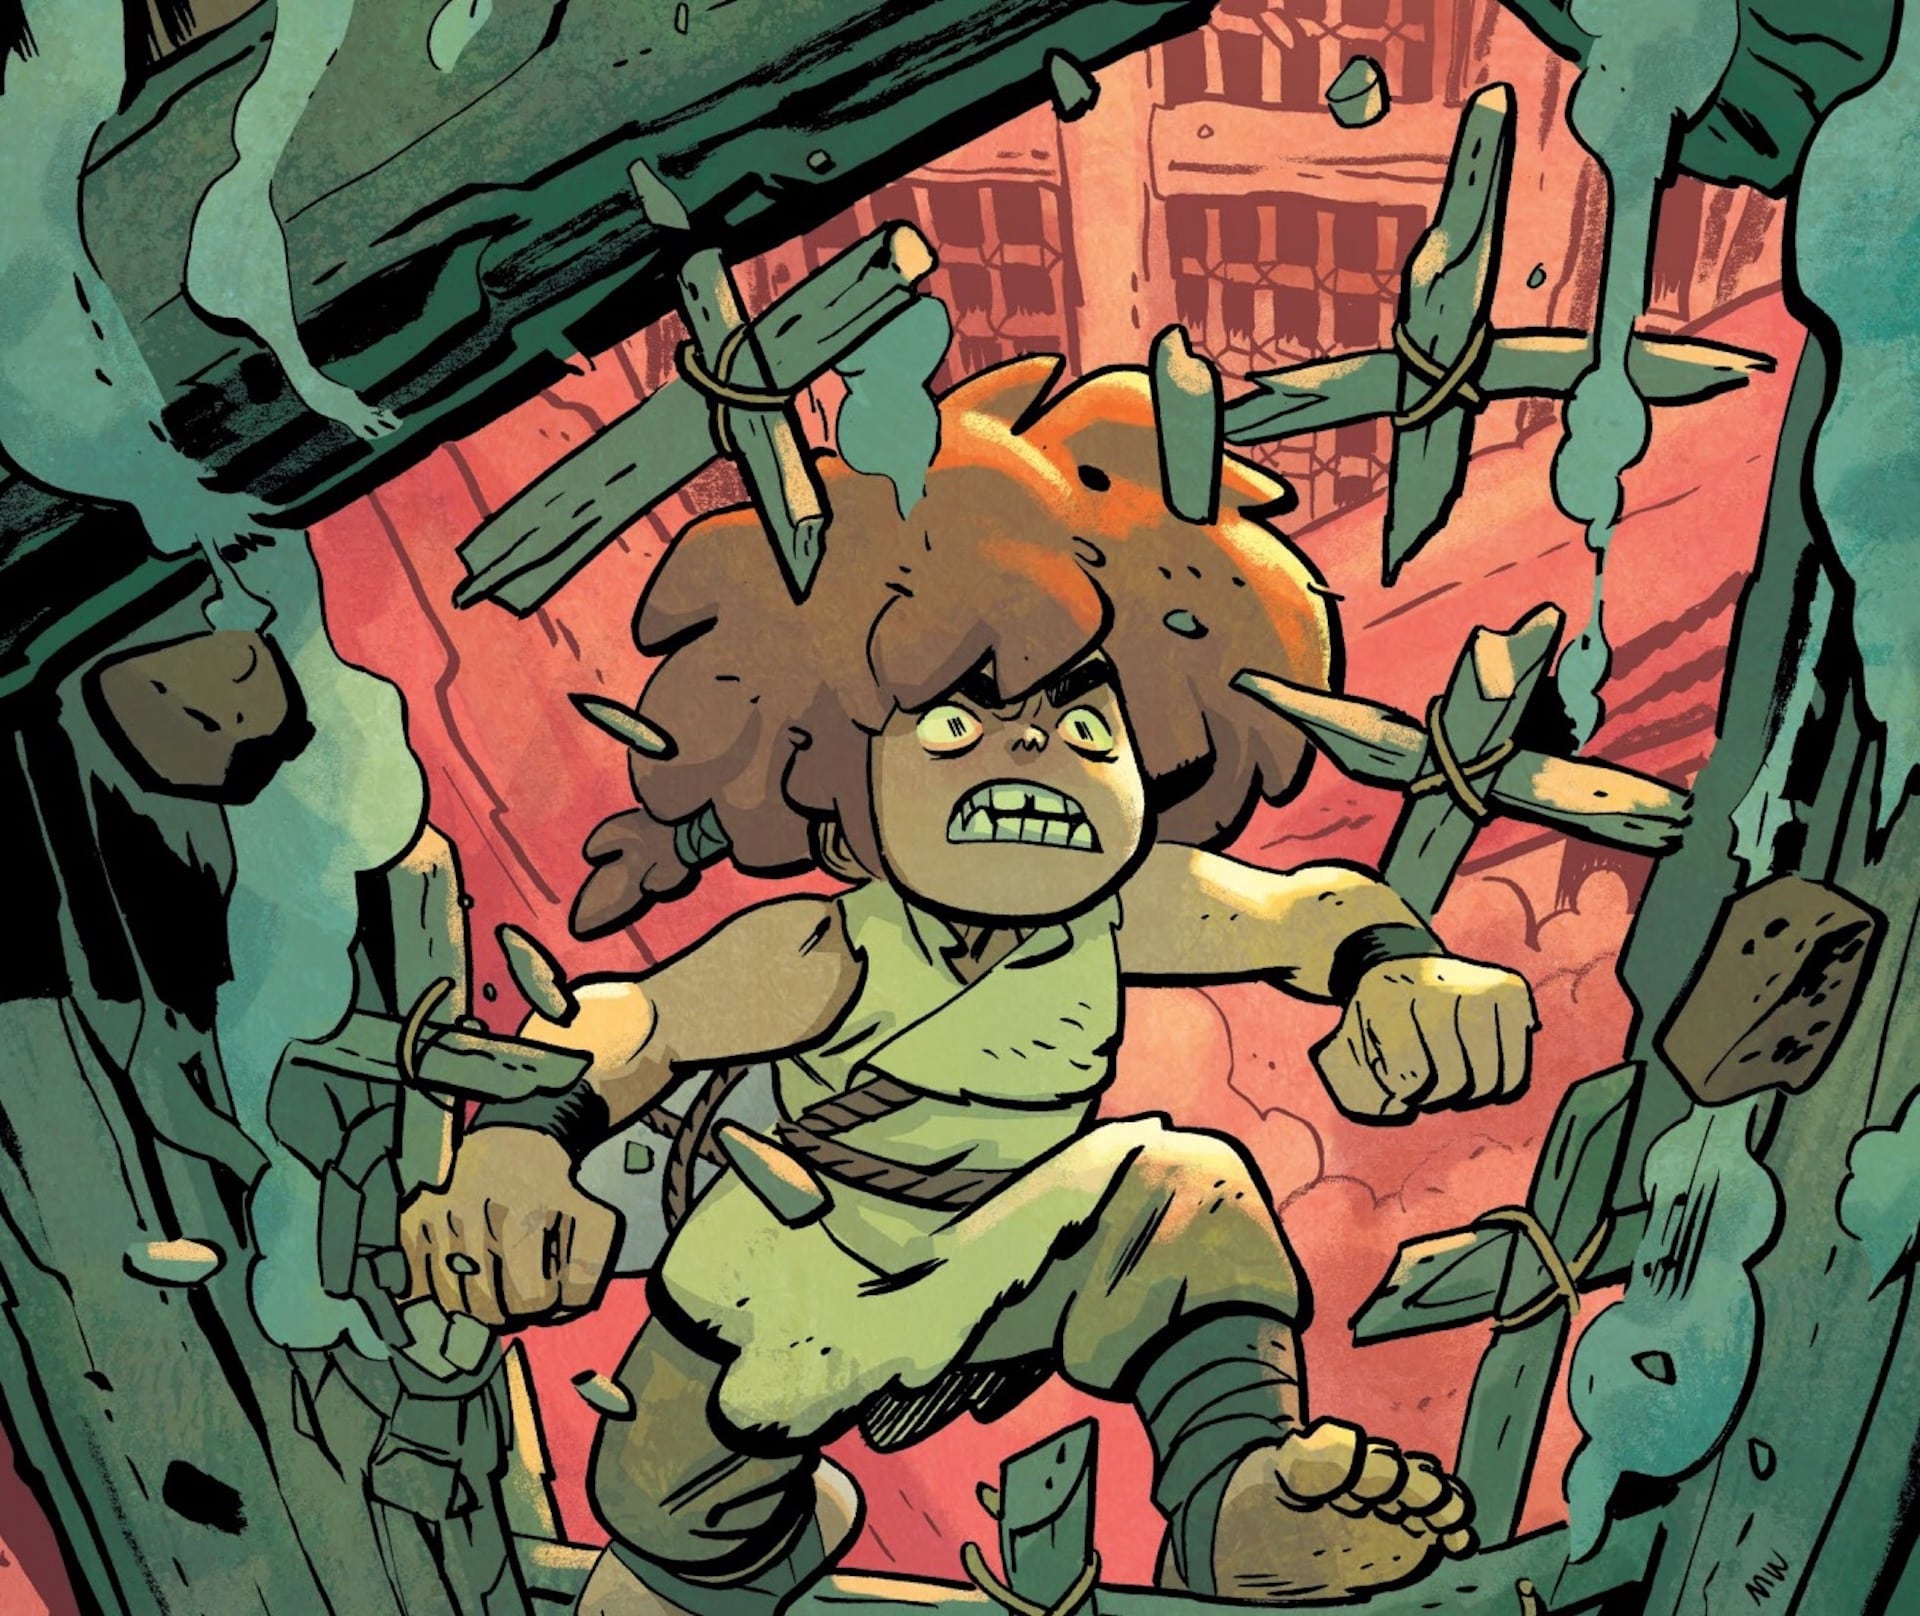 ‘Jonna and the Unpossible Monsters’ #6 shows how a story can feel big in the little moments